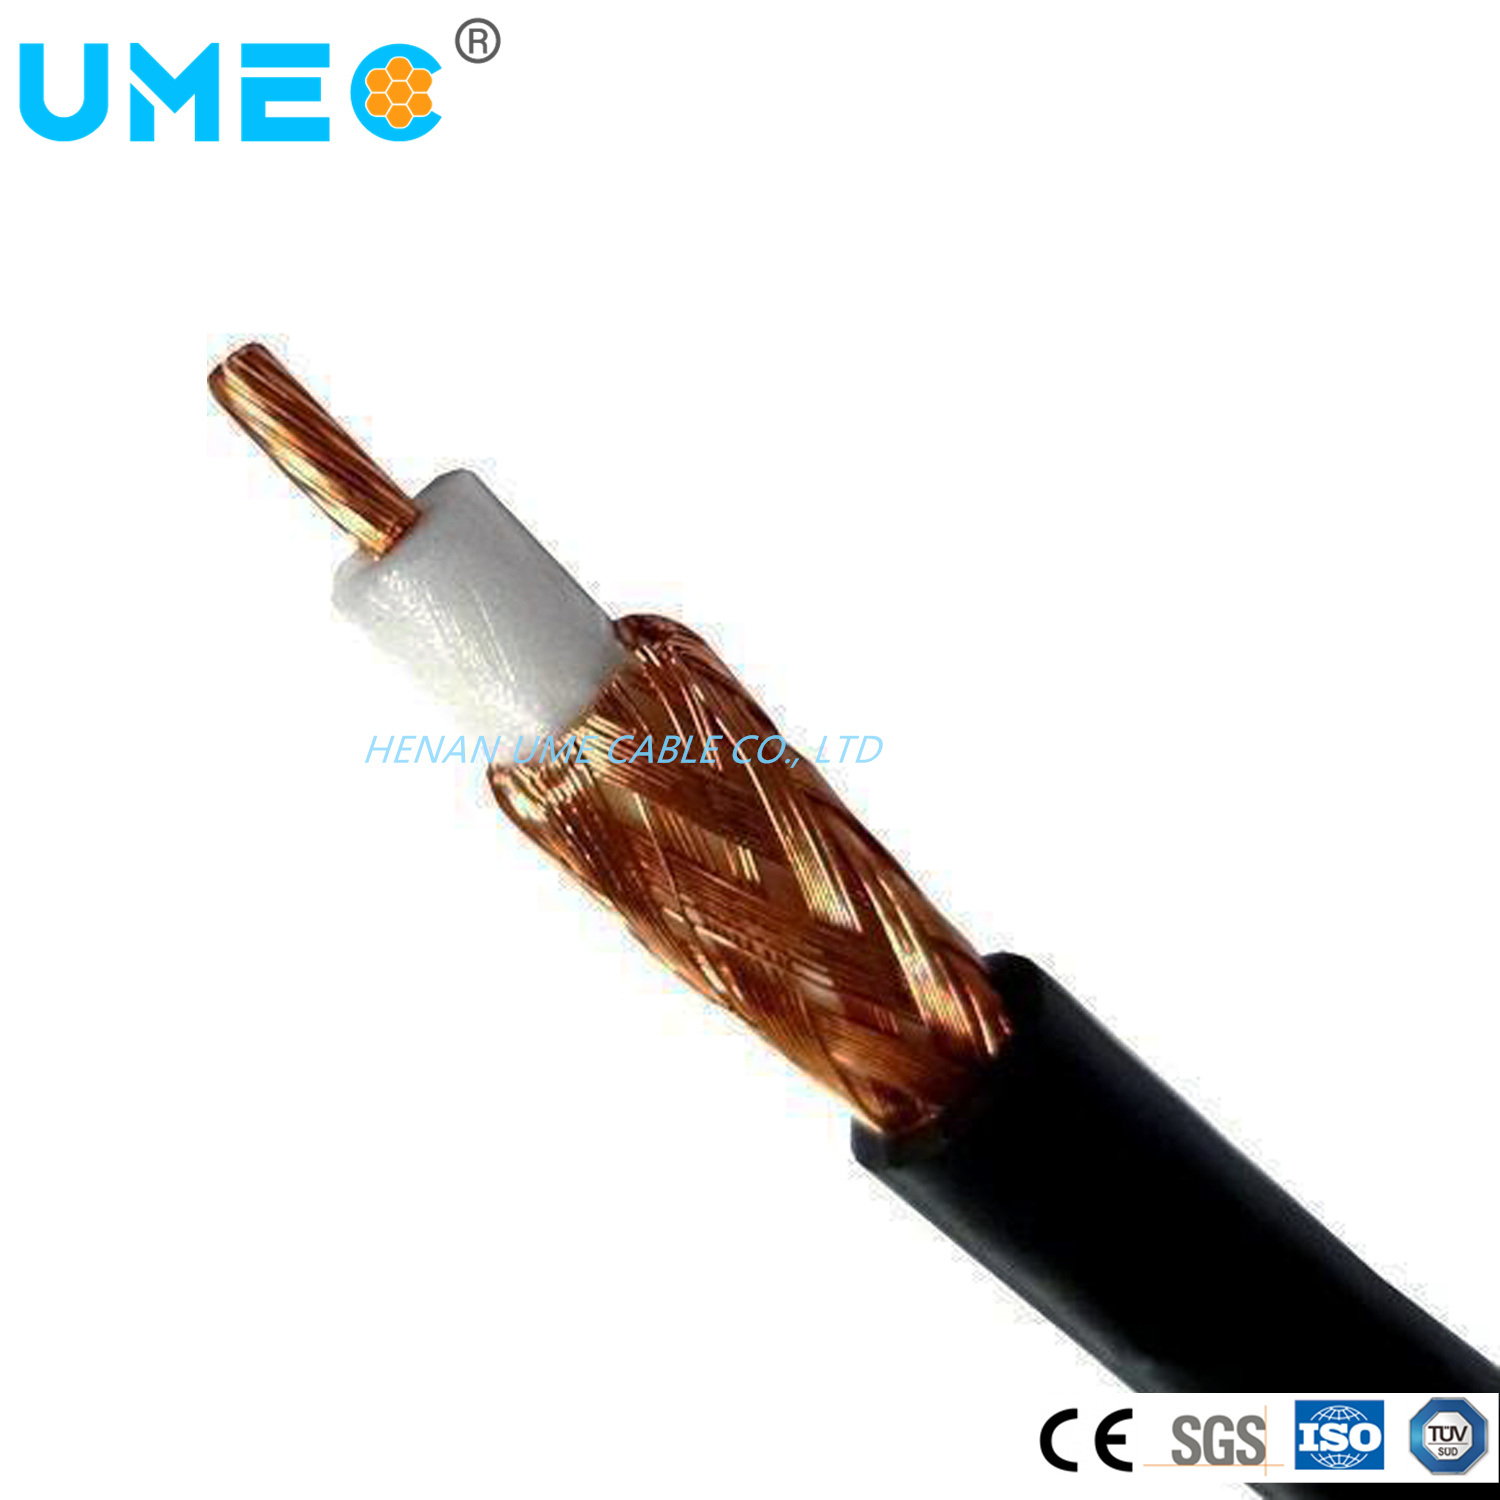 Control Cable with PVC Insulation and Sheath for Ship